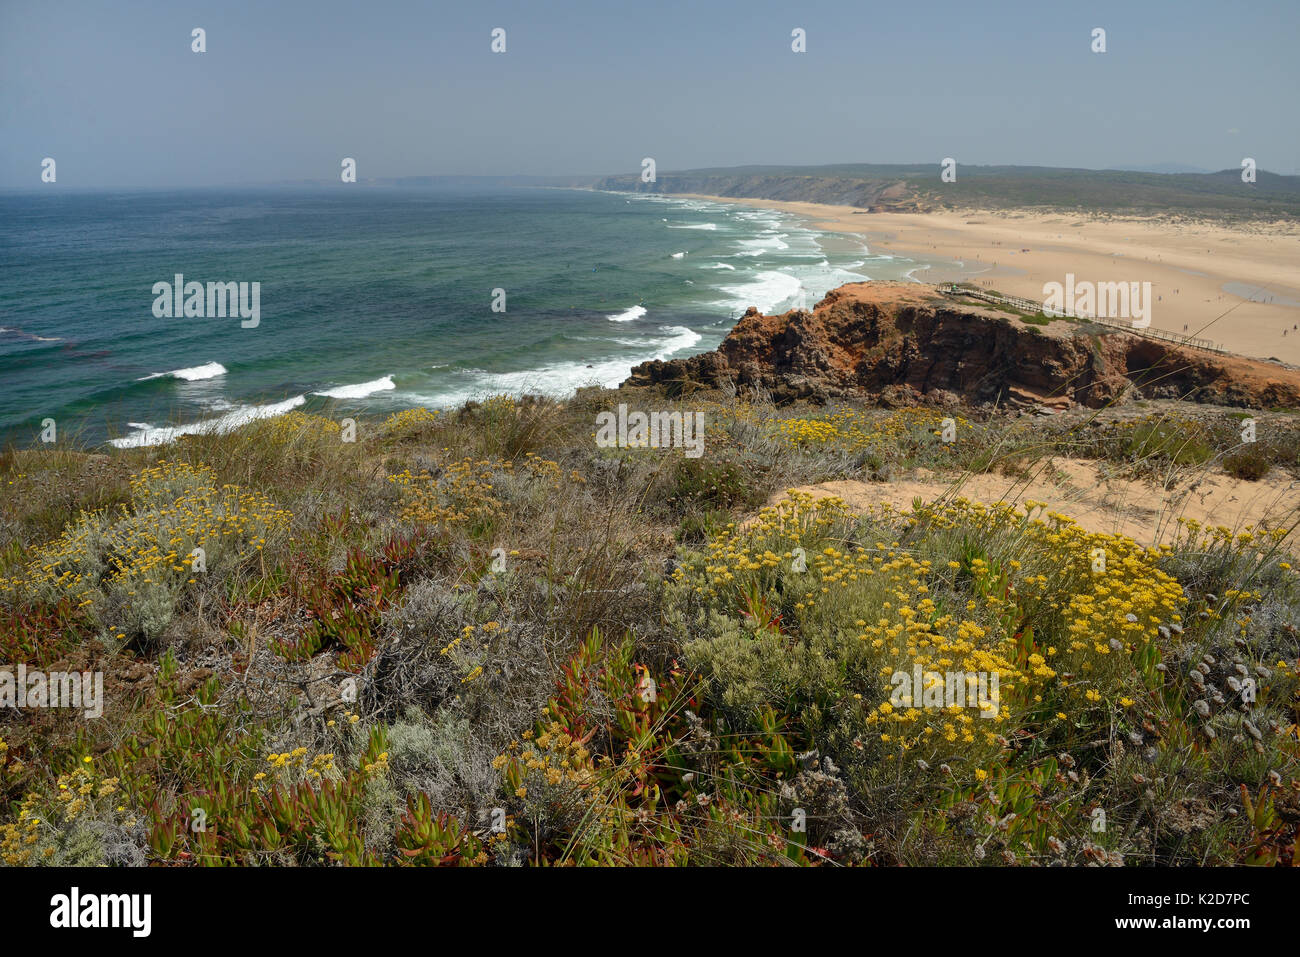 Landscape of Praia do Bordeira beach with Curry plant (Helichrysum italicum picardii) clumps flowering in the foreground, Southeastern Alentejo and Costa Vicentina National Park, Algarve, Portugal, August 2013. Stock Photo